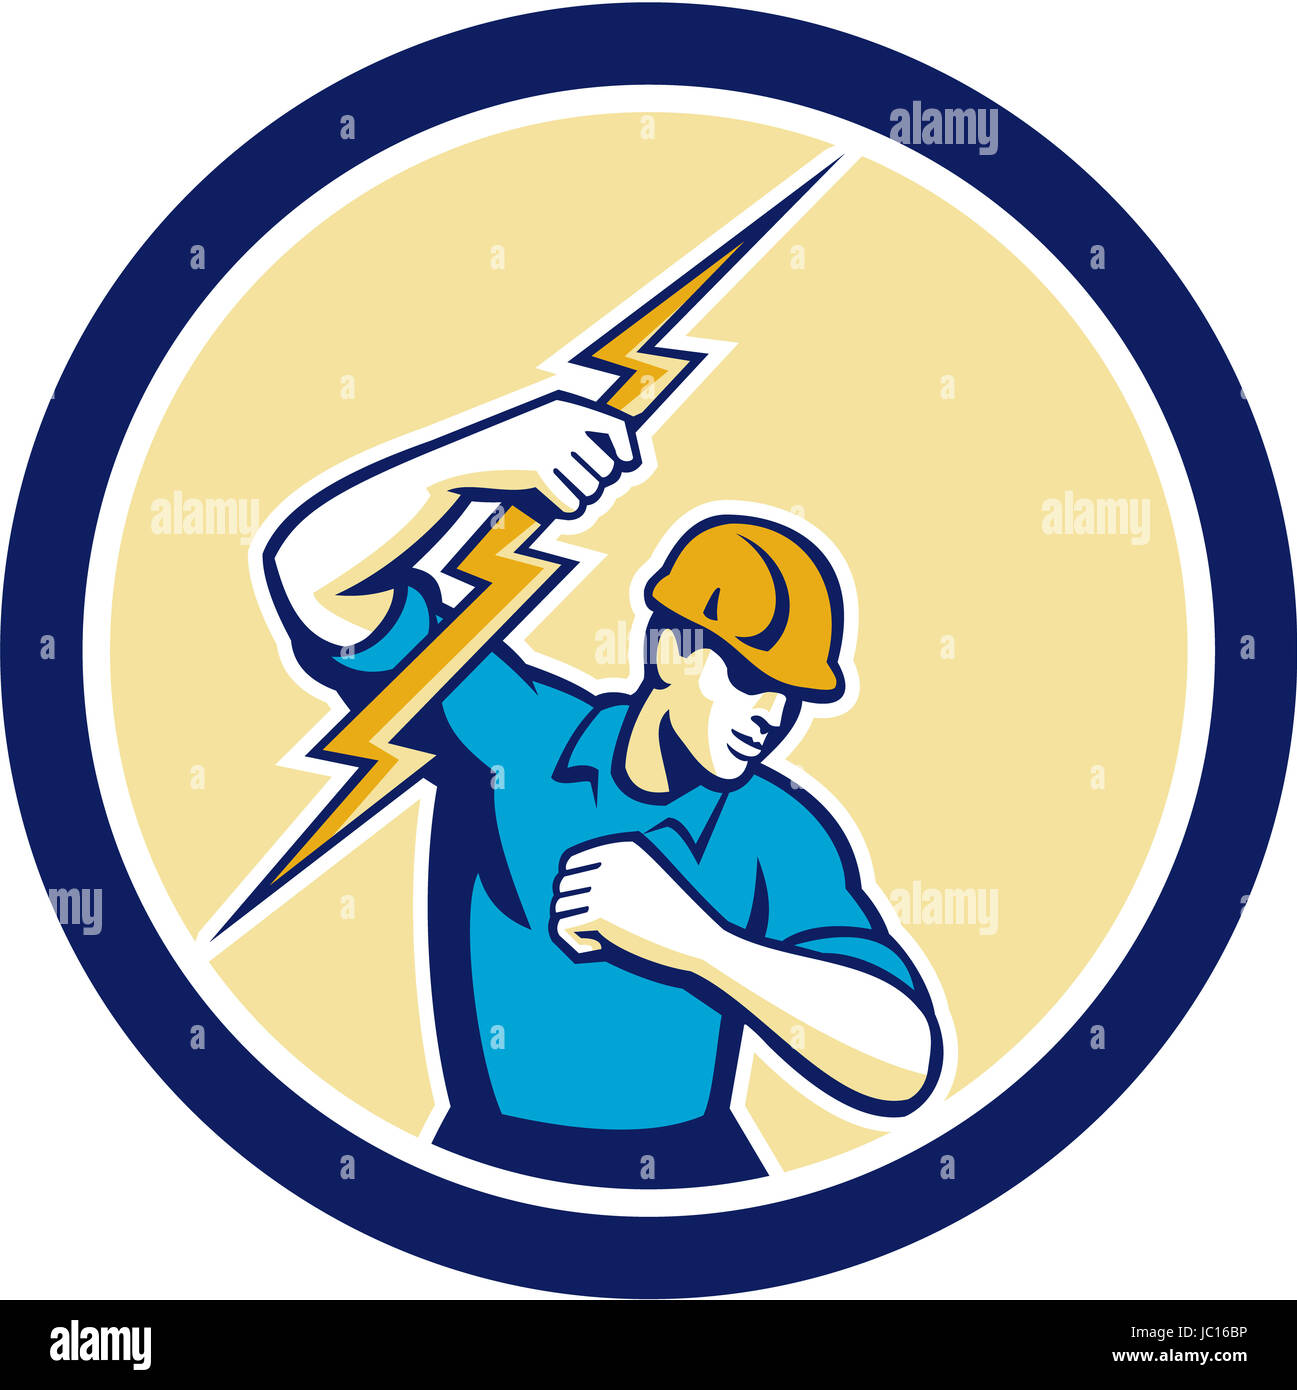 Illustration of an electrician construction worker holding a lightning bolt set inside circle done in retro style on isolated white background. Stock Photo